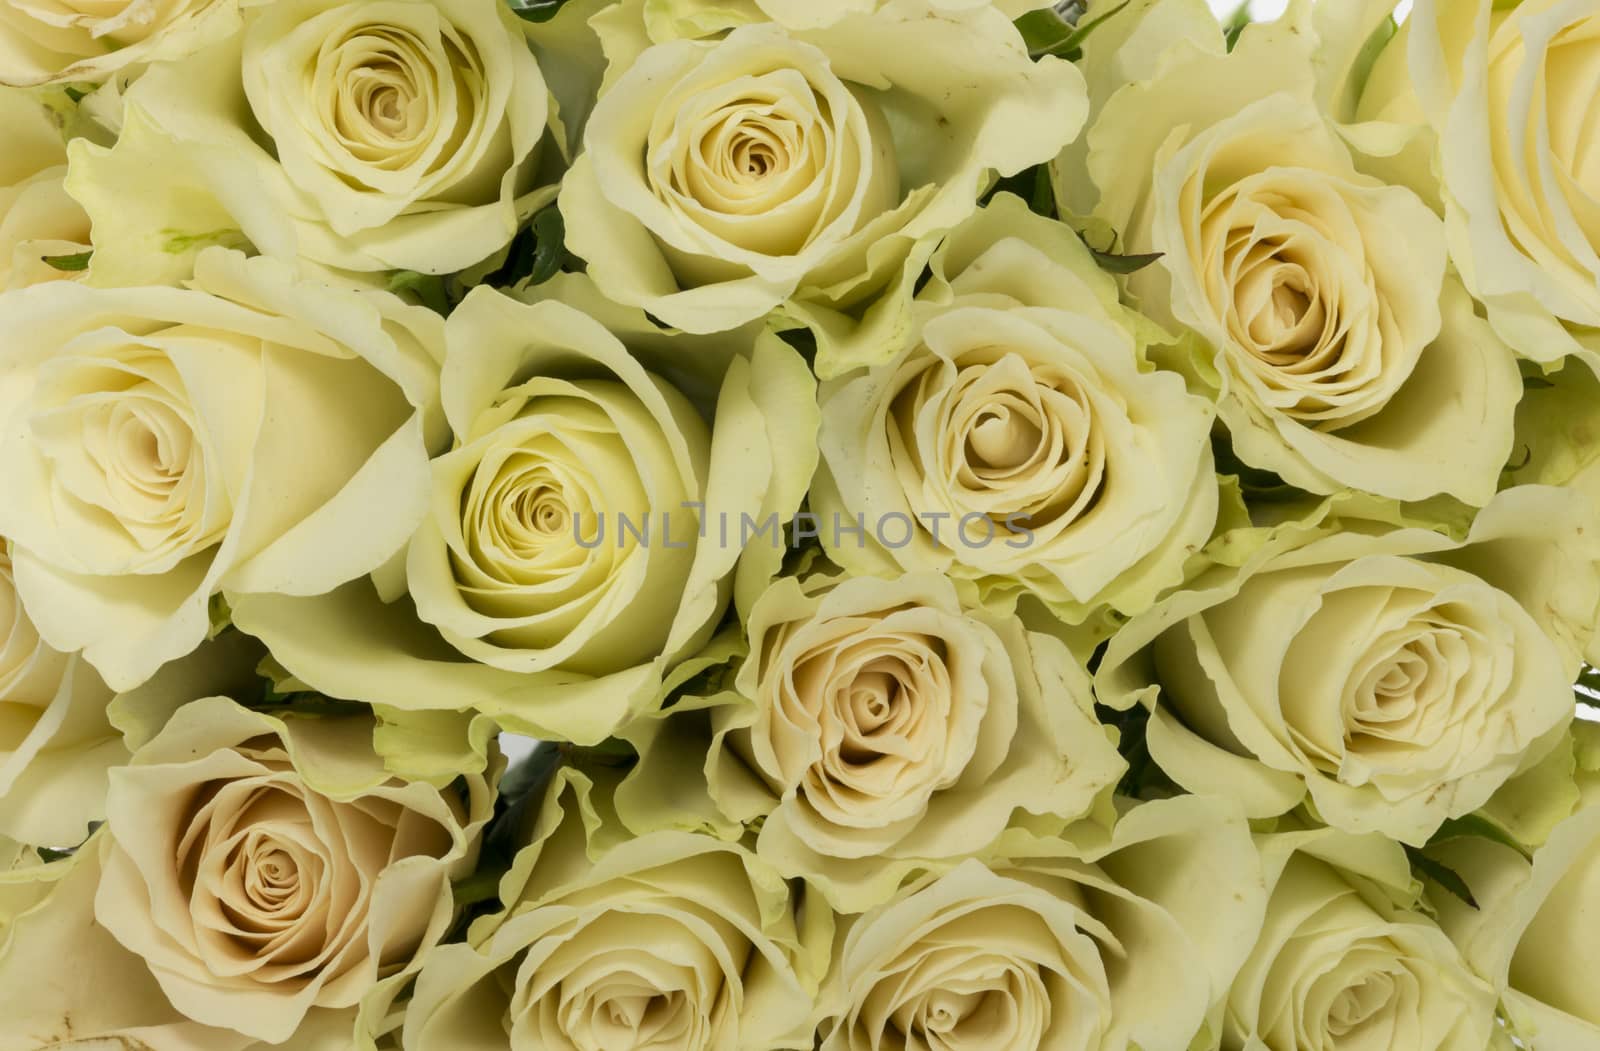 white roses background by compuinfoto